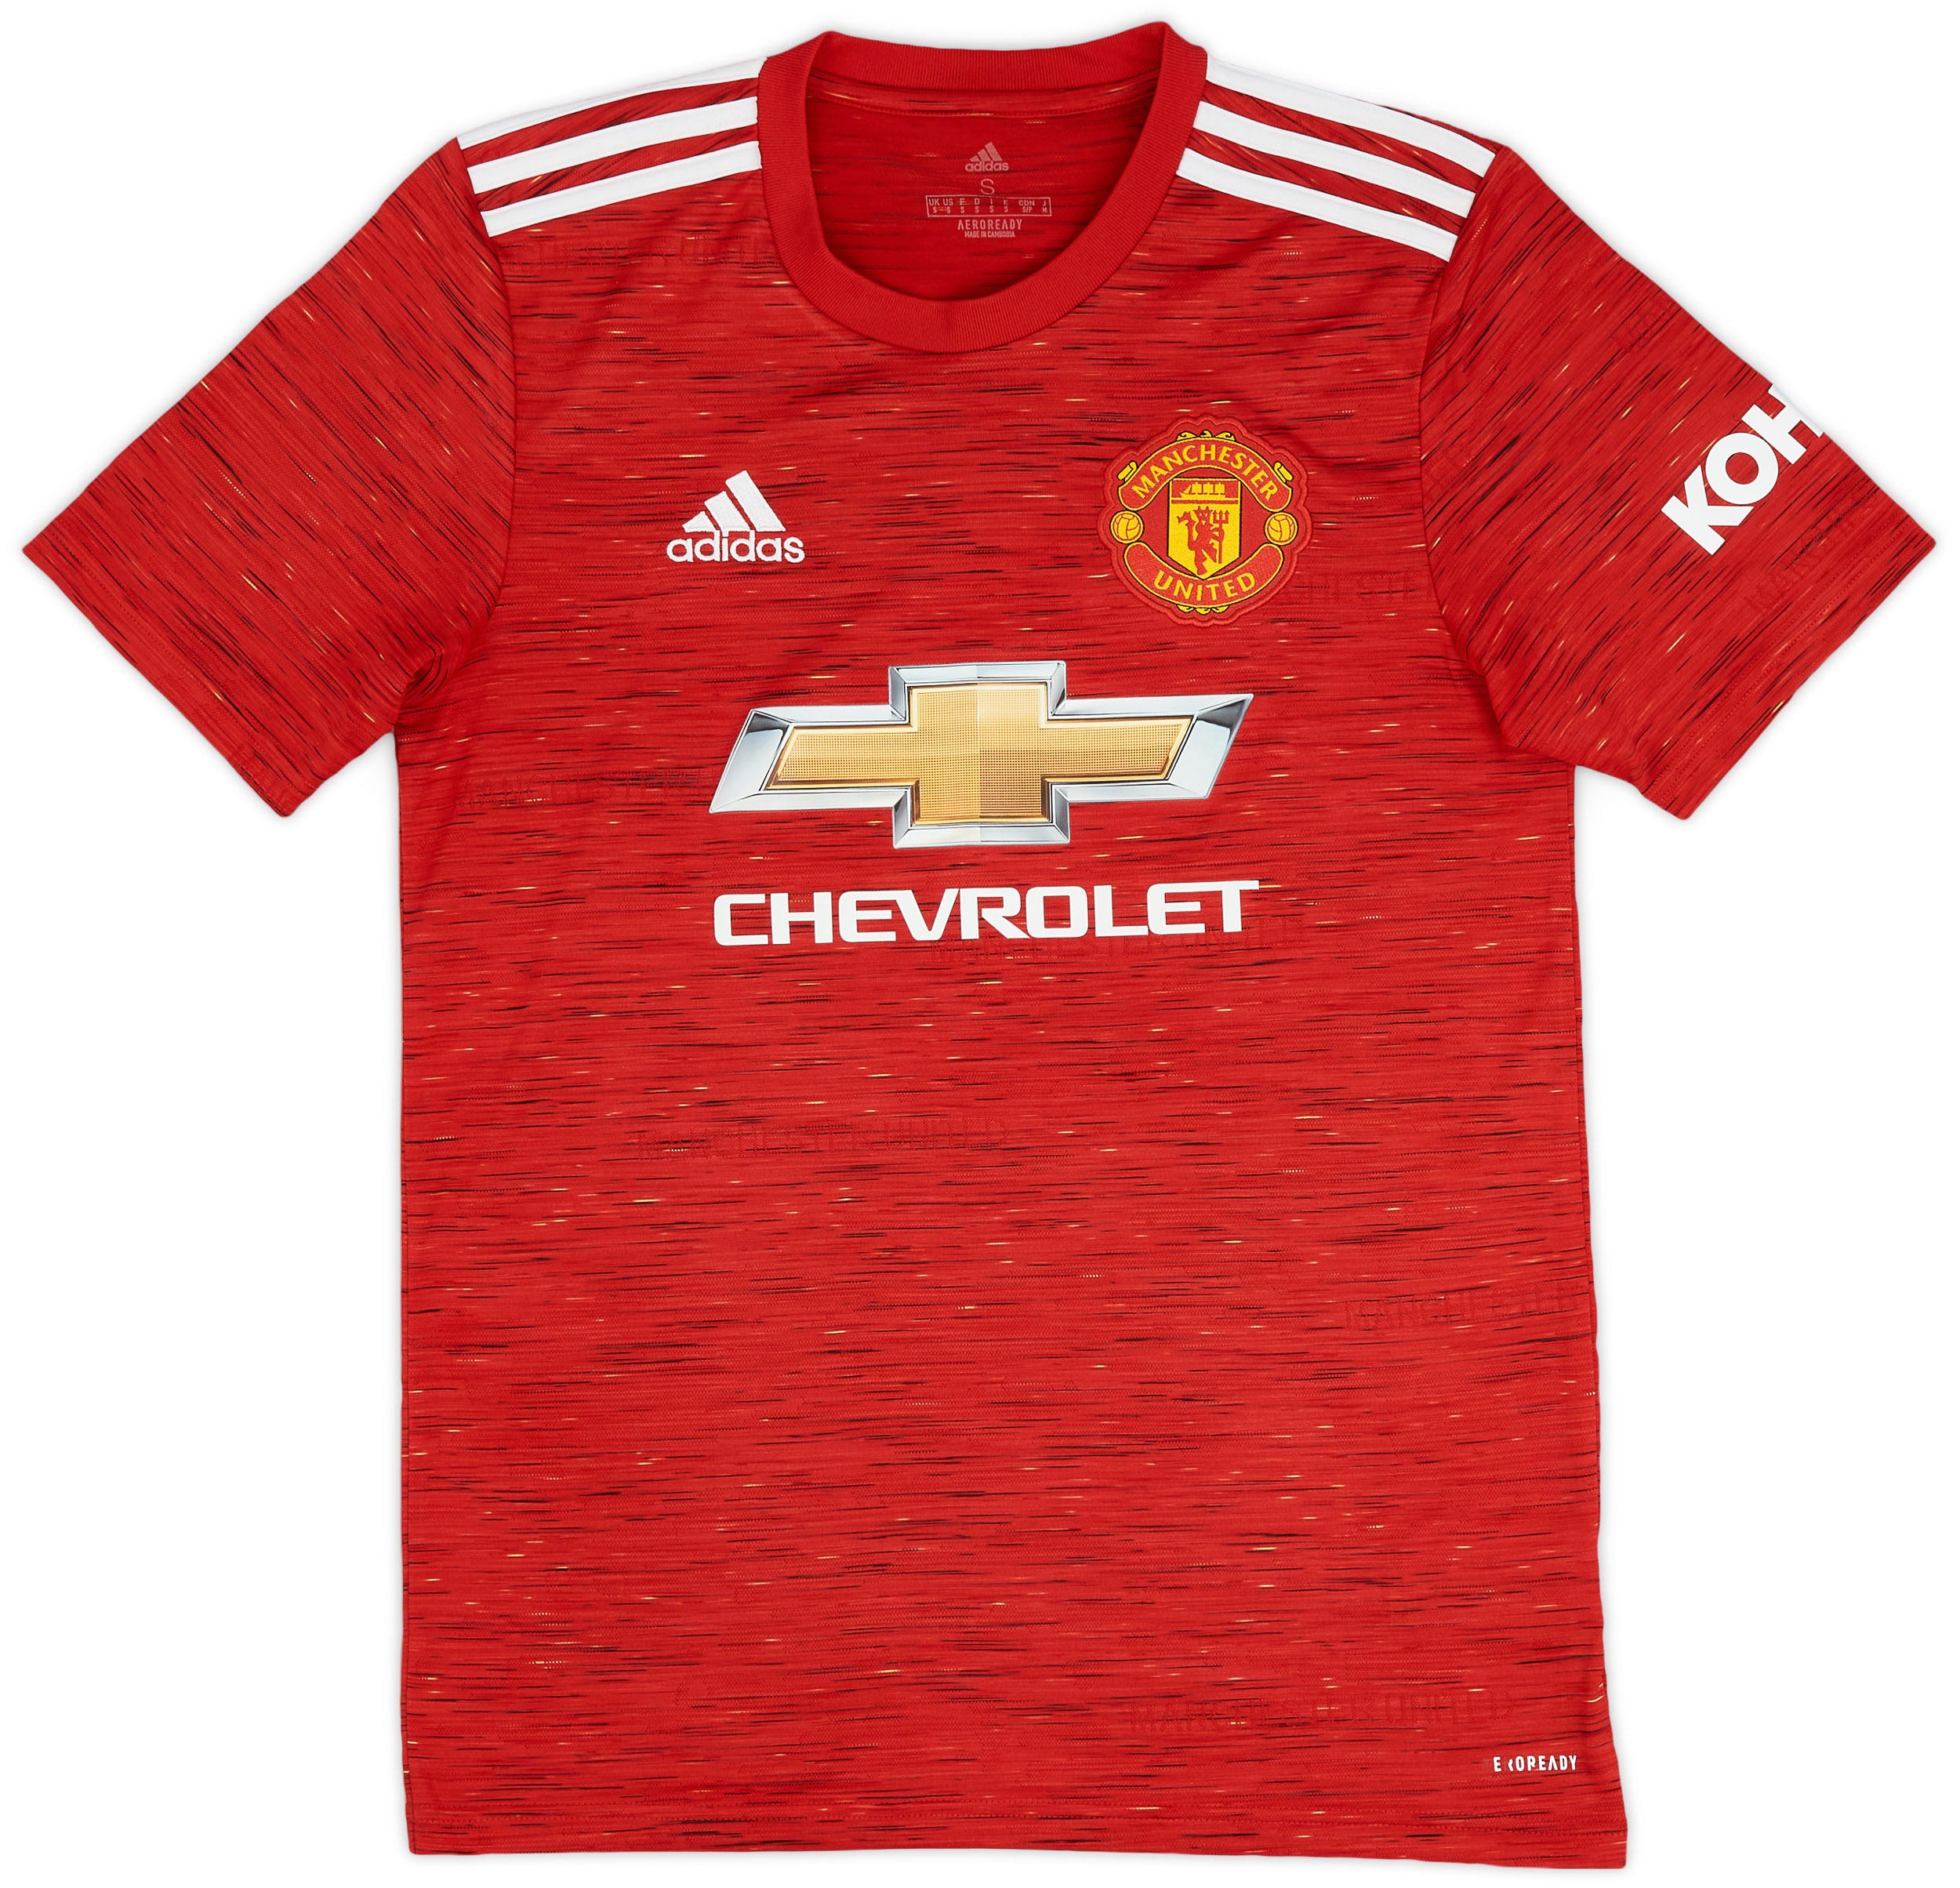 2020-21 Manchester United Home Shirt - 8/10 - ()